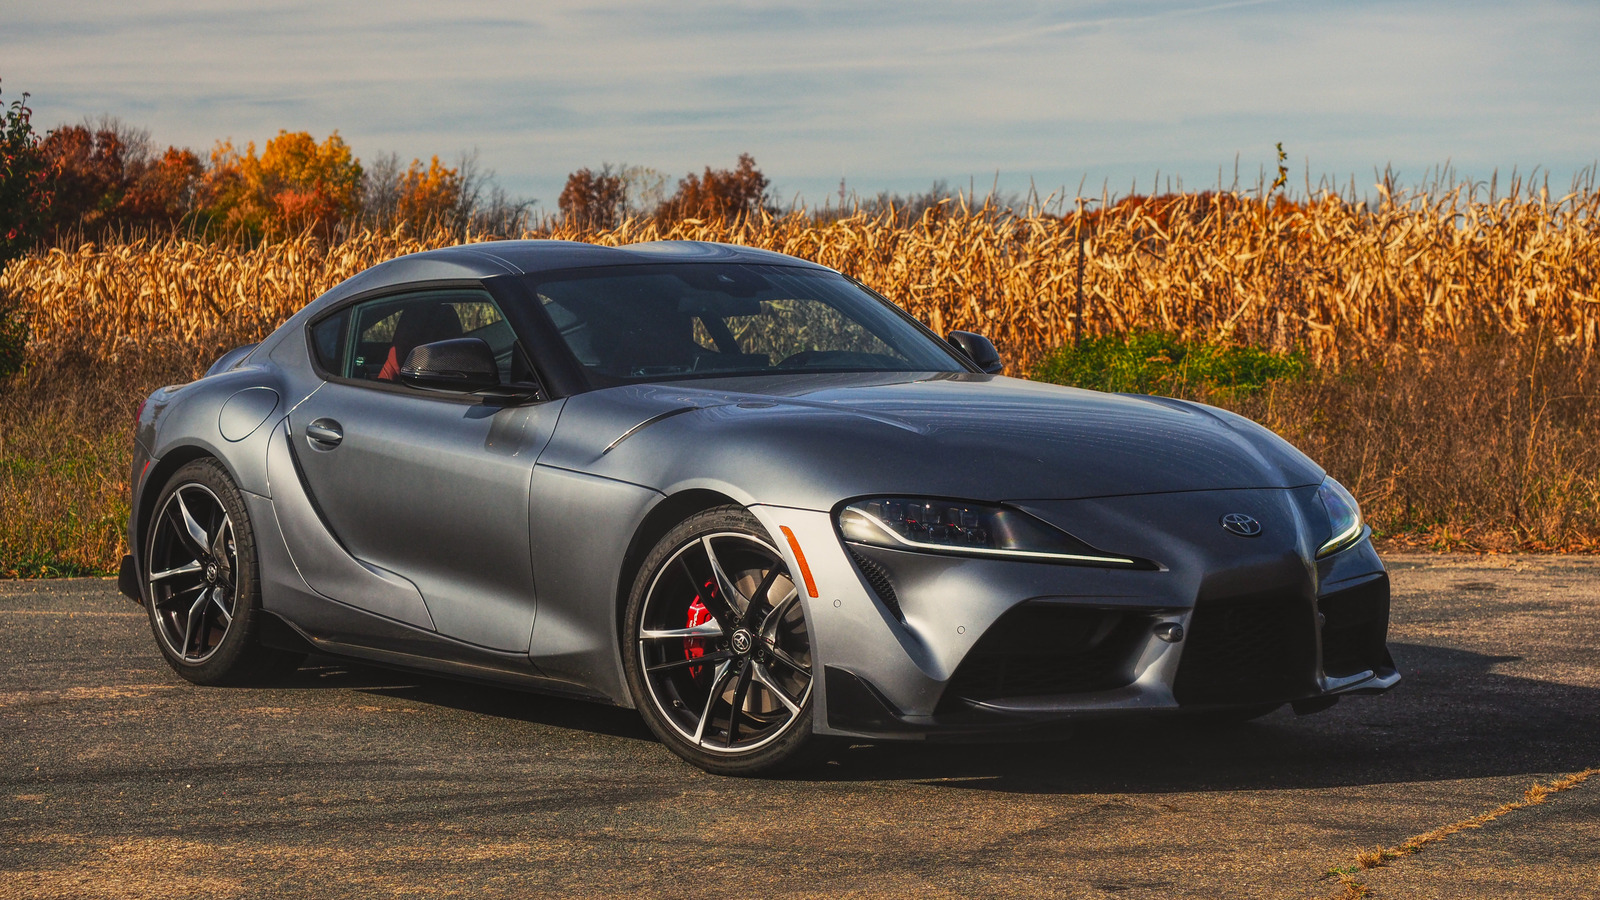 2022 Toyota GR Supra 3.0 Review: For Everyday Enthusiasts